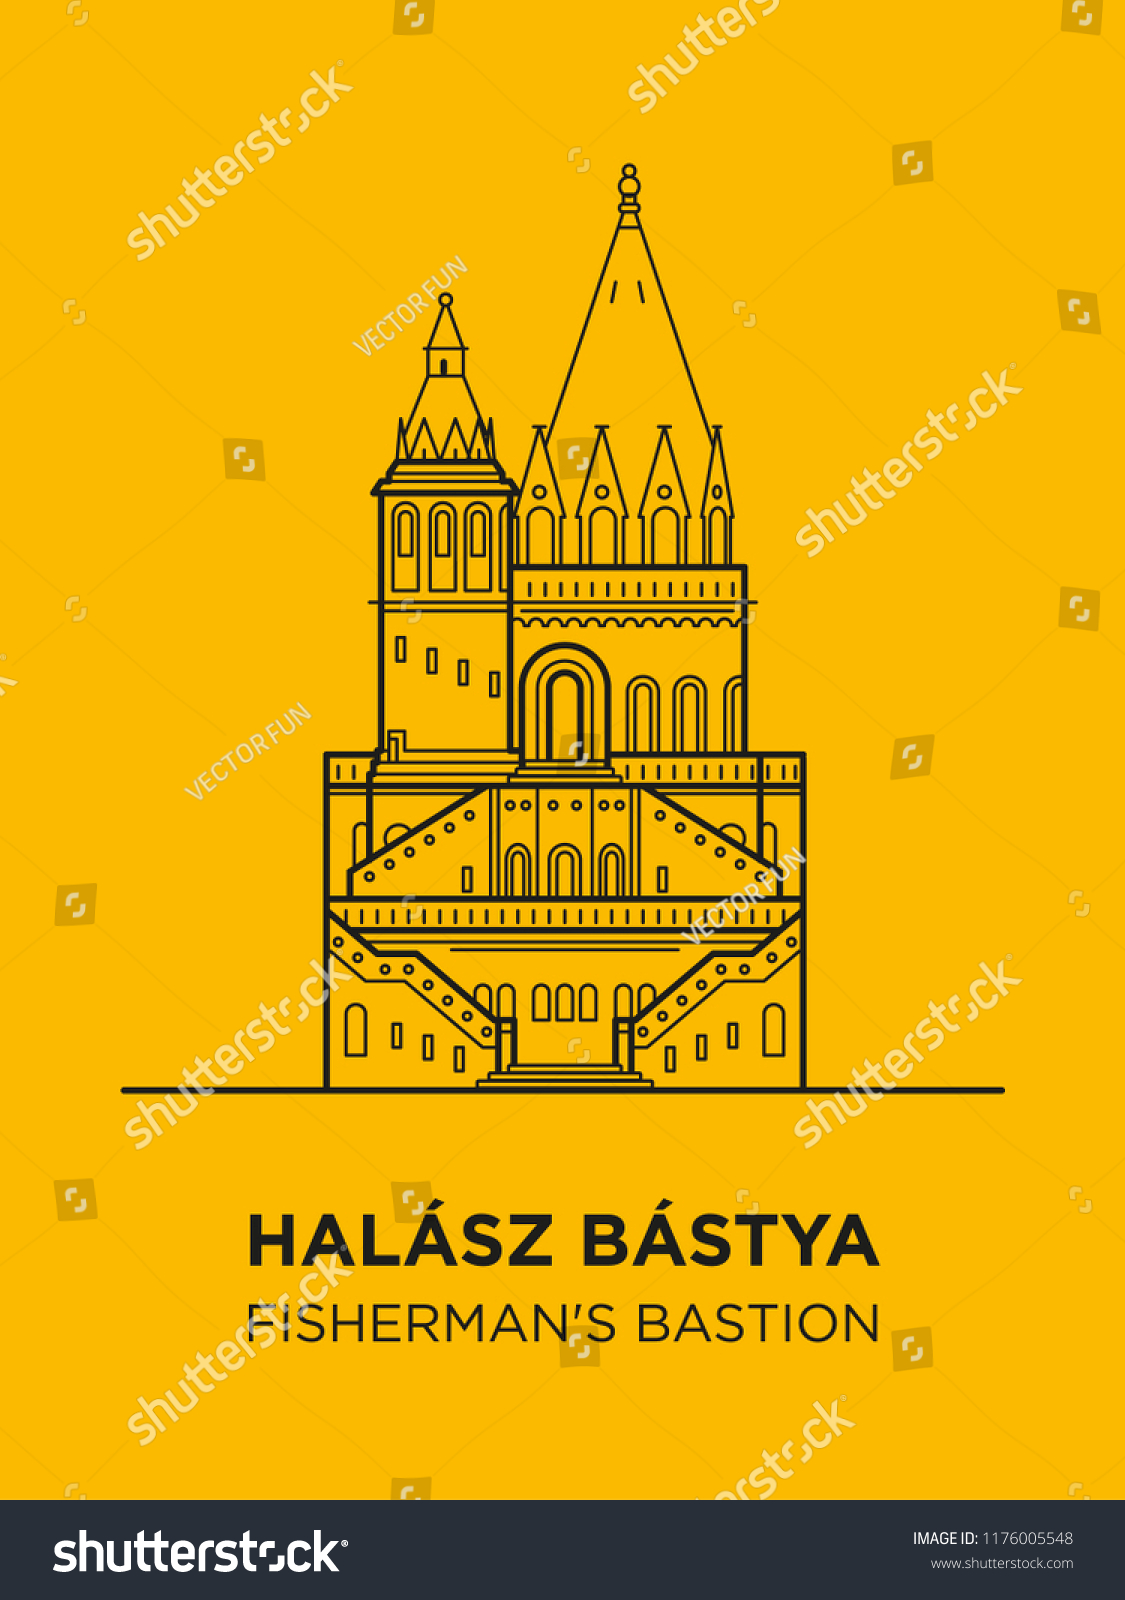 SVG of Fisherman's bastion towers in Hungary capital icon. Vector art illustration flat design. Budapest famous architectural landmark thin line illustration. Hungarian tourist destination you have to visit svg